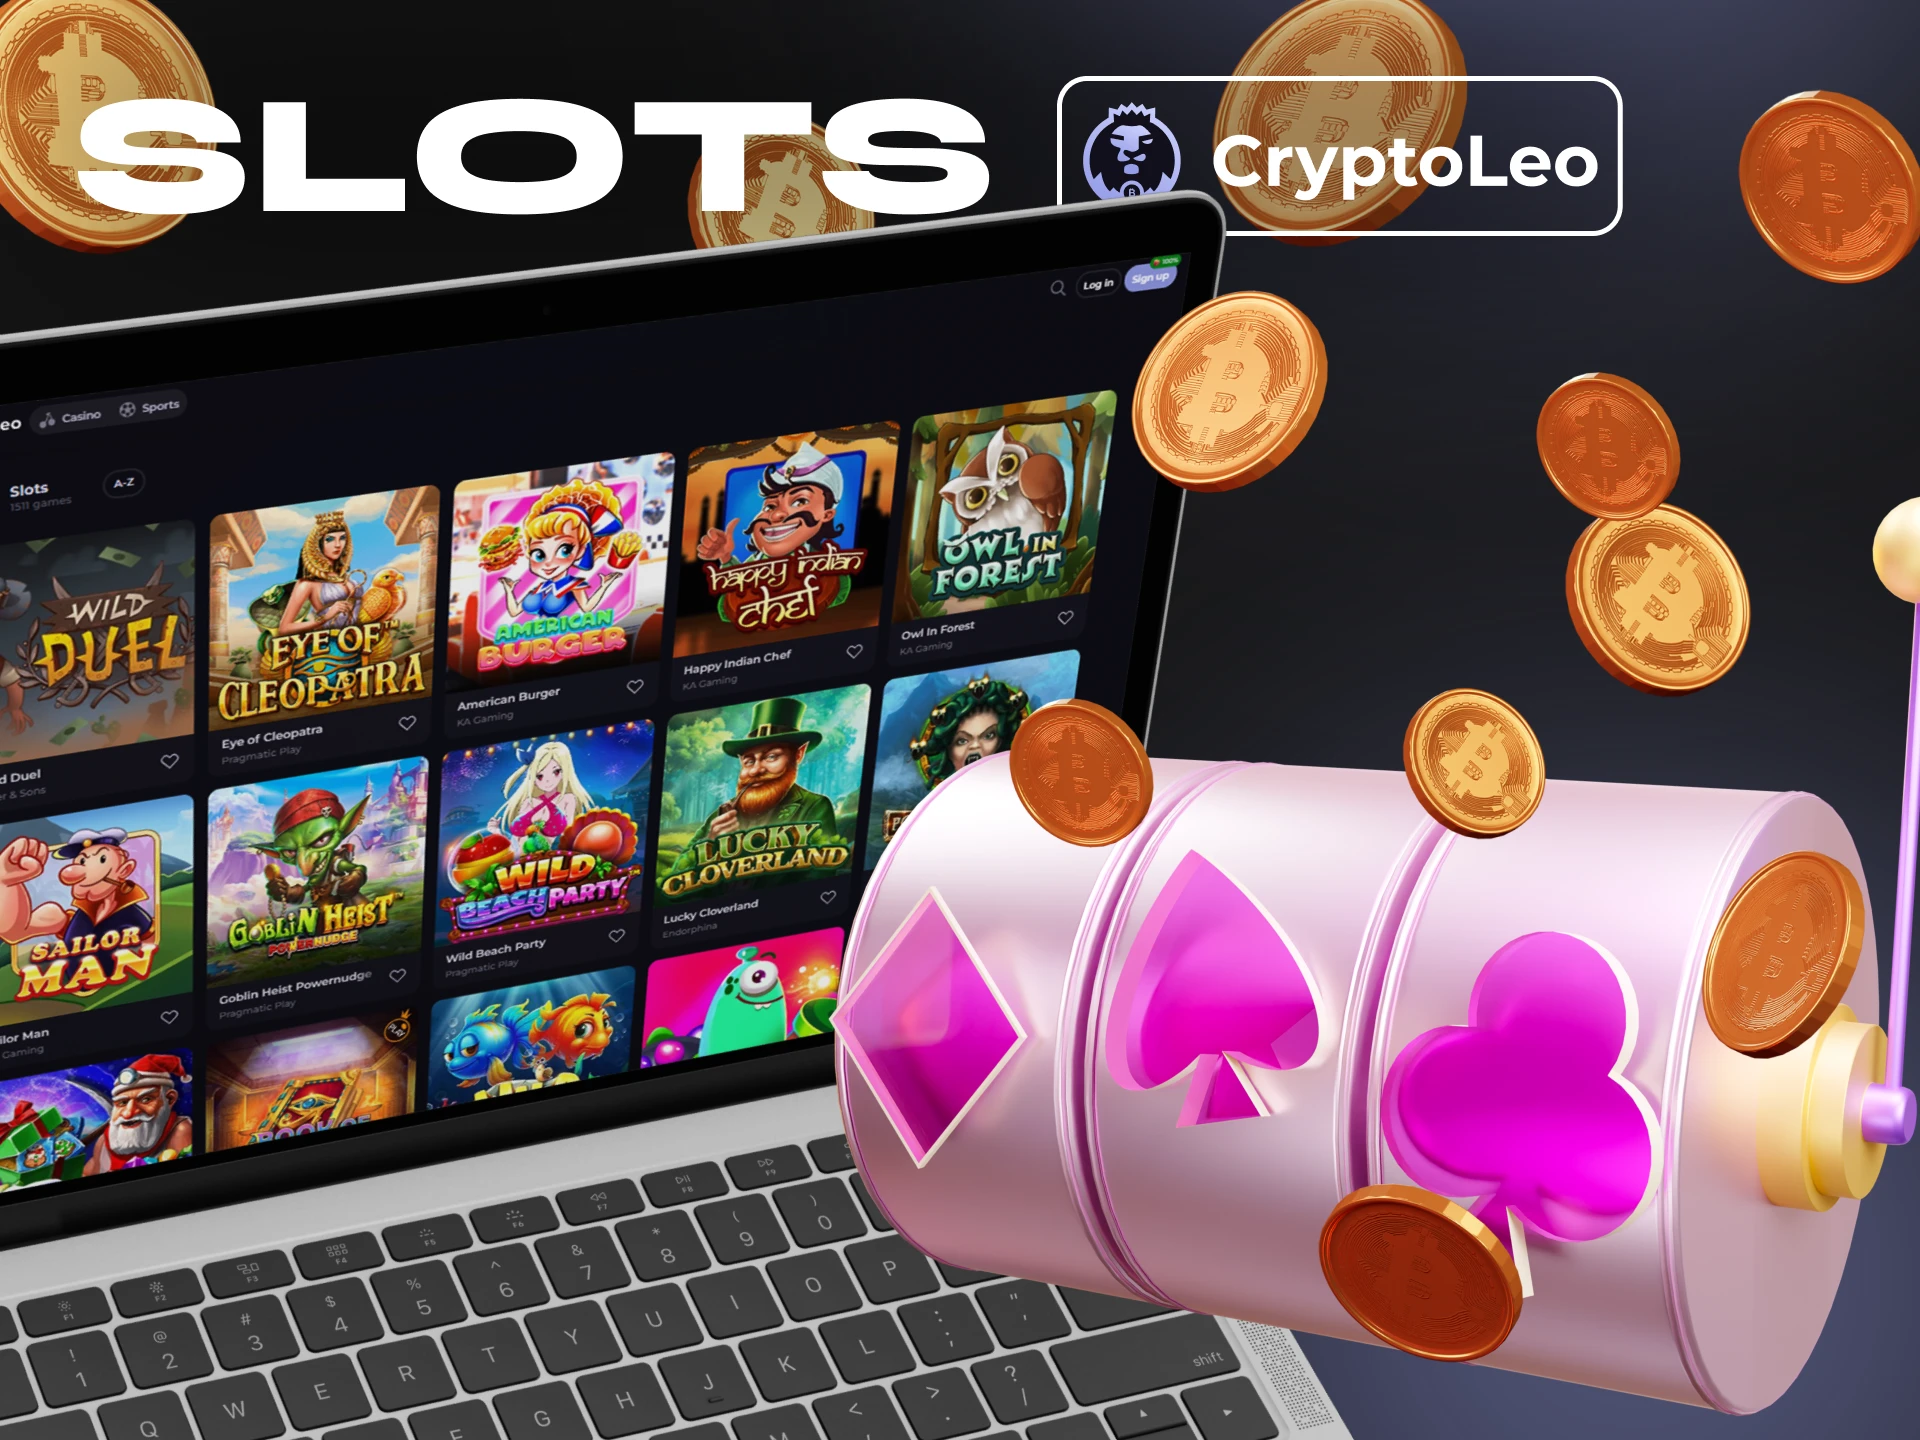 Cryptoleo offers various slots games.